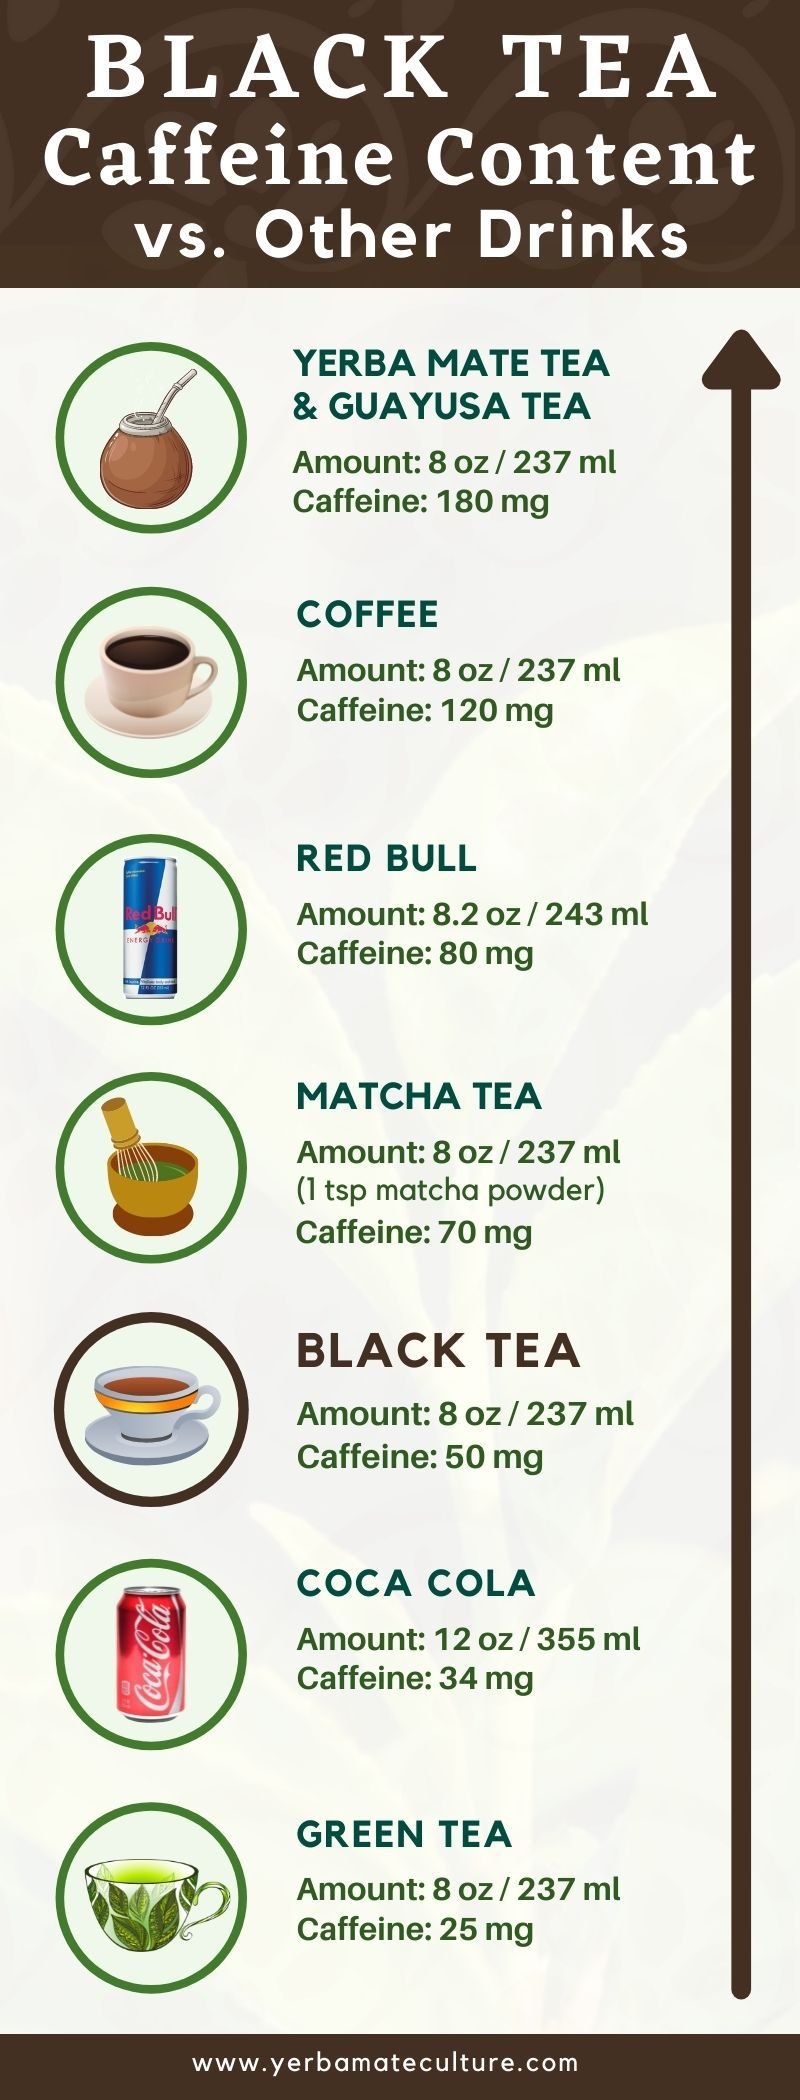 Black Tea Caffeine Content Compared to Other Drinks